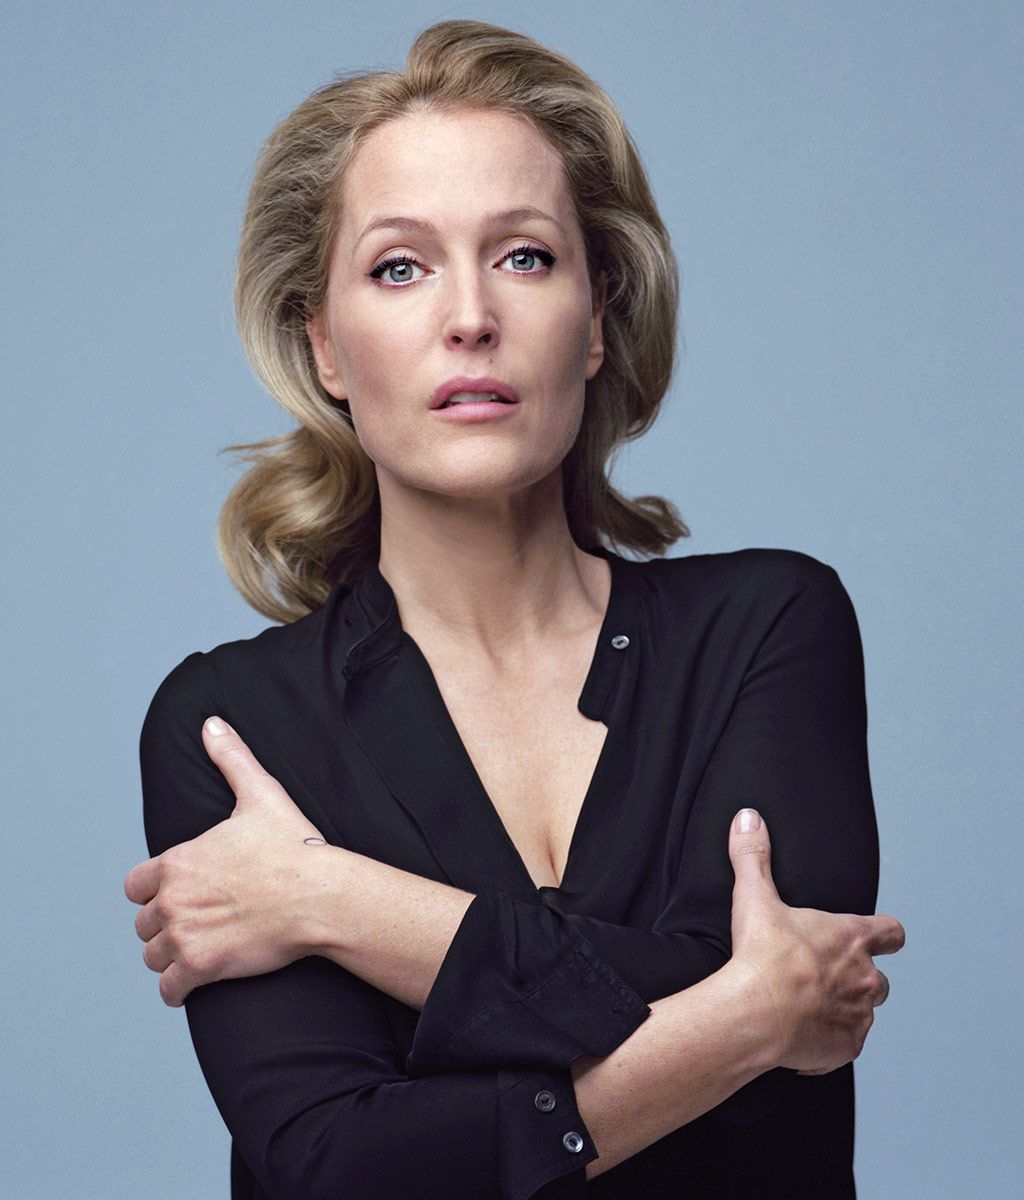 I want Gillian Anderson to grind her pussy on my